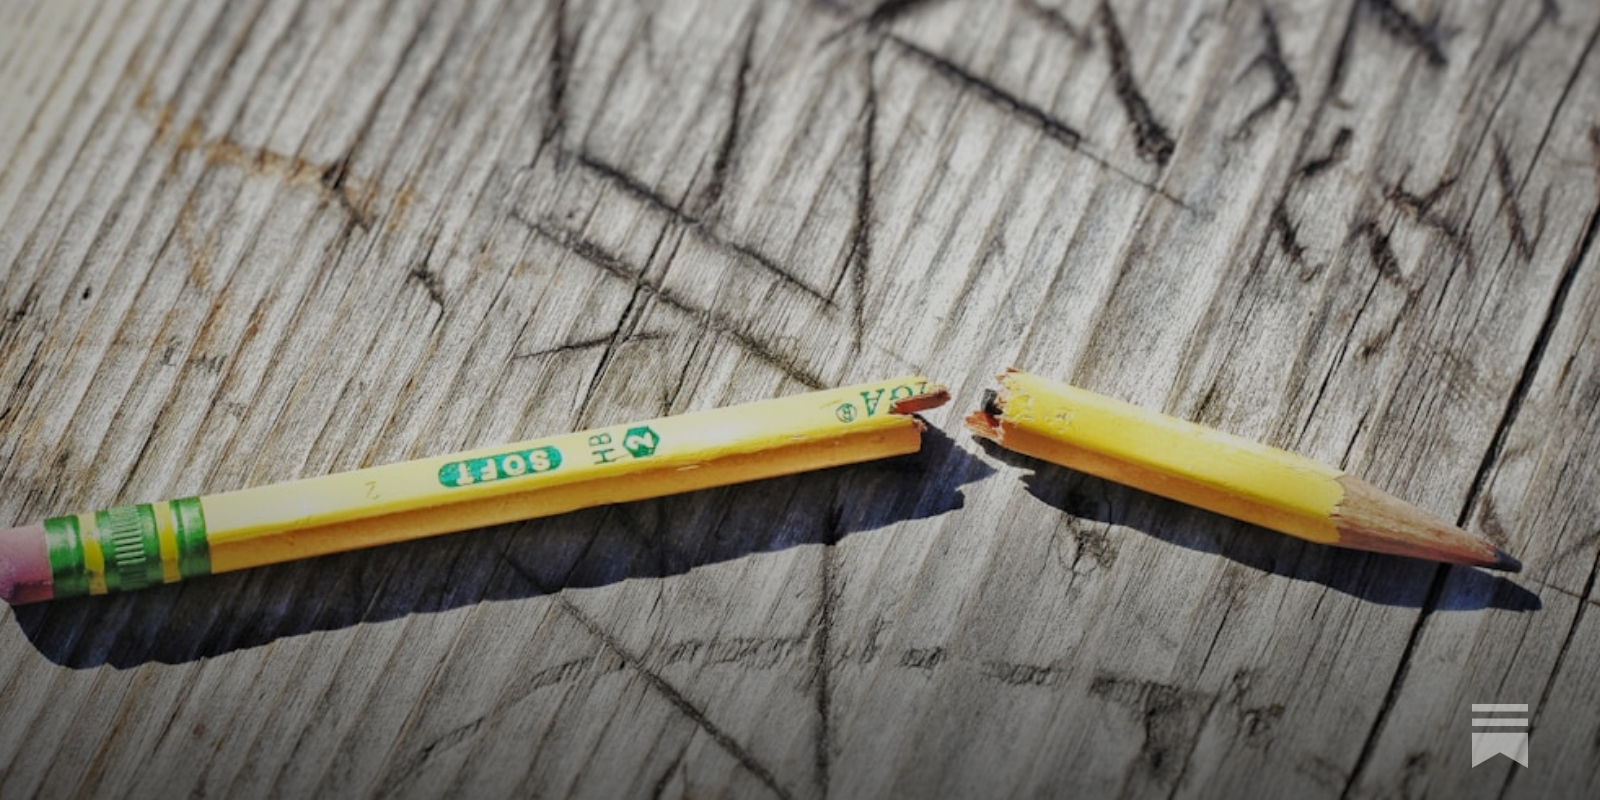 Why Pencils Have Erasers - Legal & Medical Services (PPS)